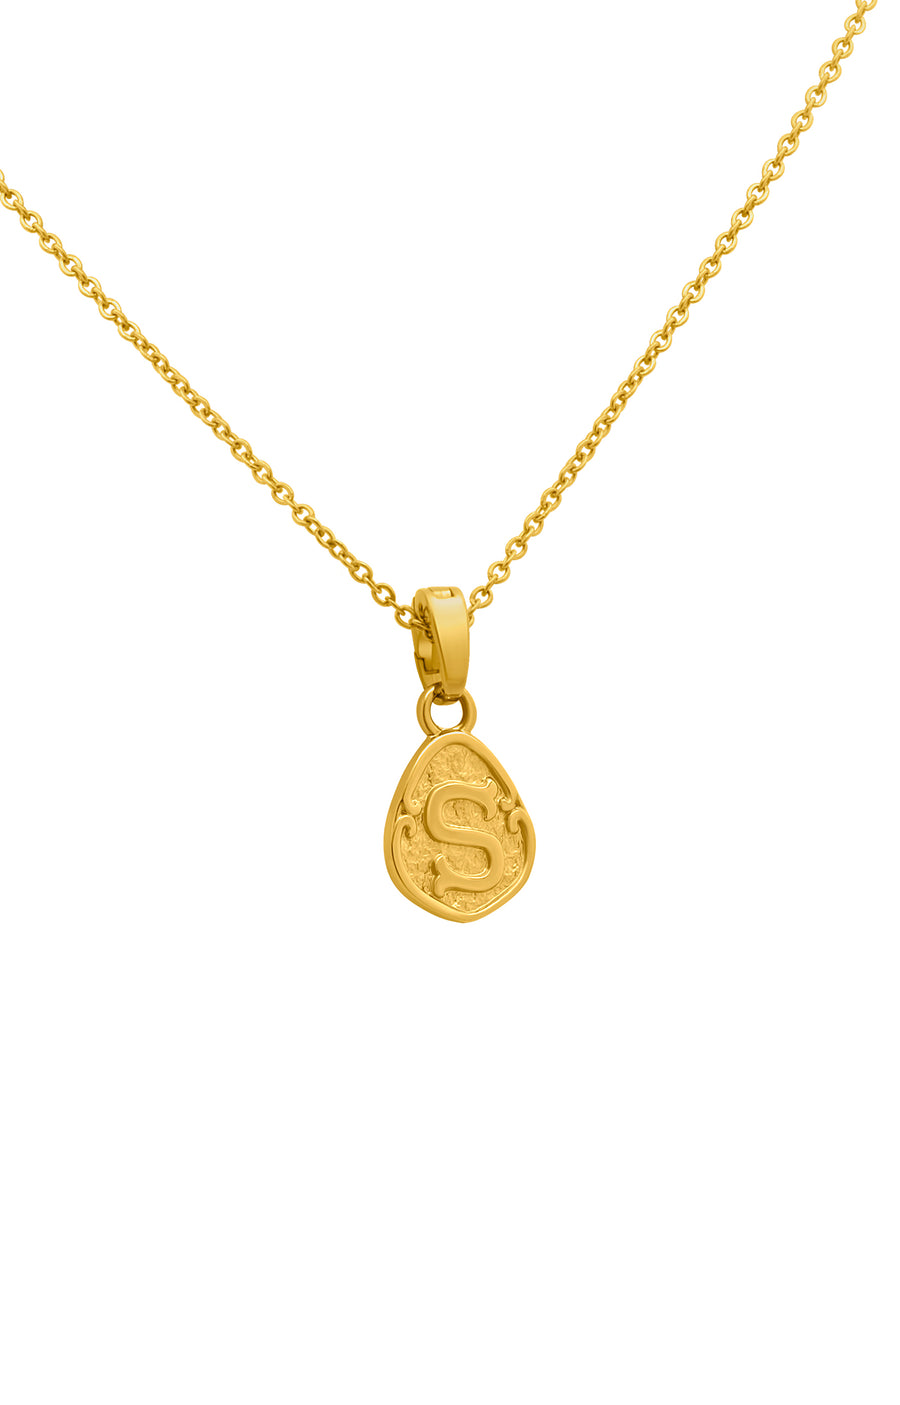 "S" Tberfil Letter Pendant with Petite Adjustable Chain Necklace